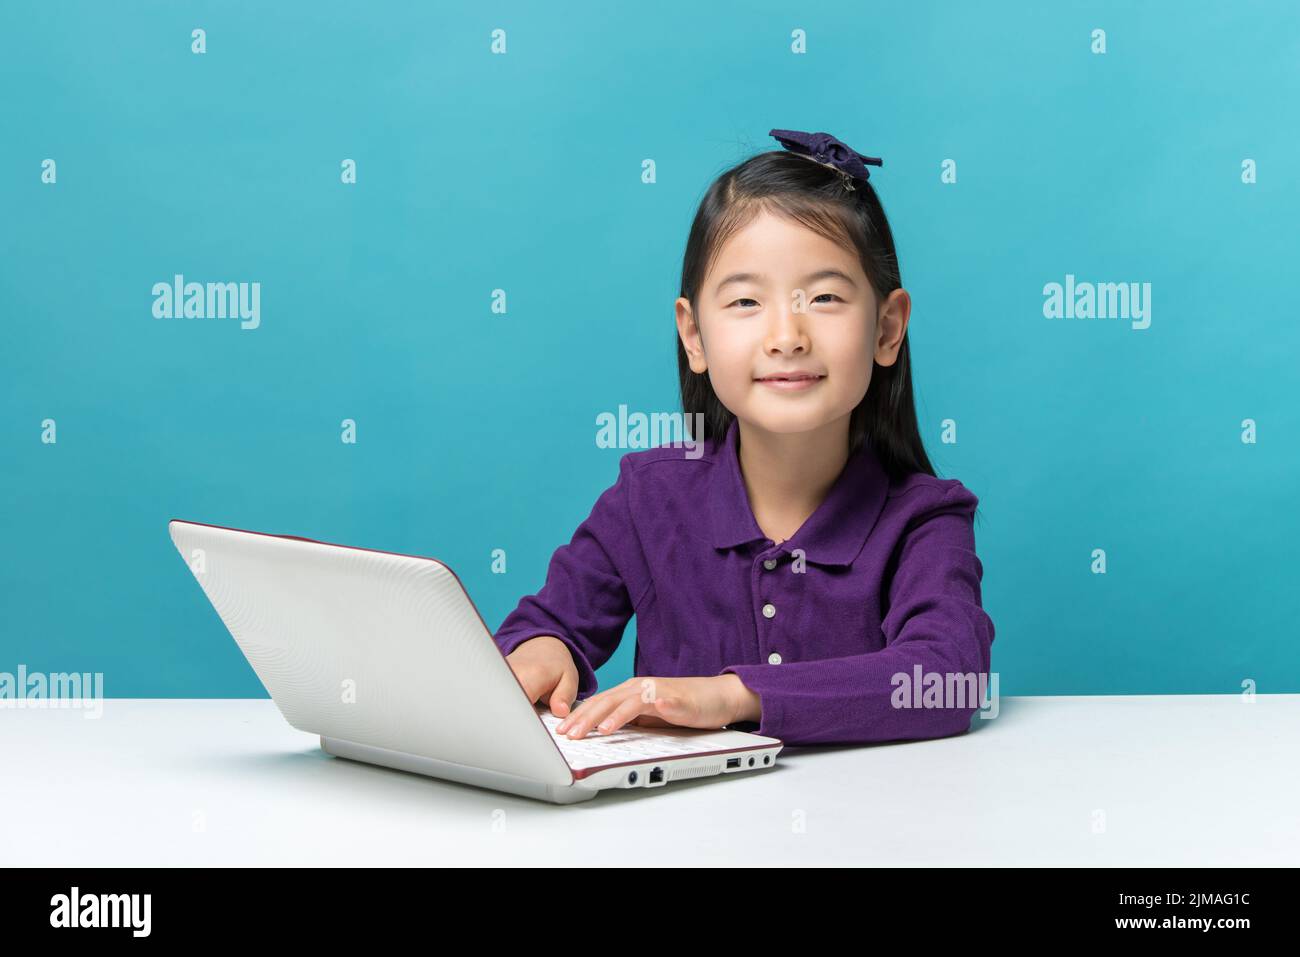 Cute asia little girl who enjoy the laptop computer on blue background Stock Photo